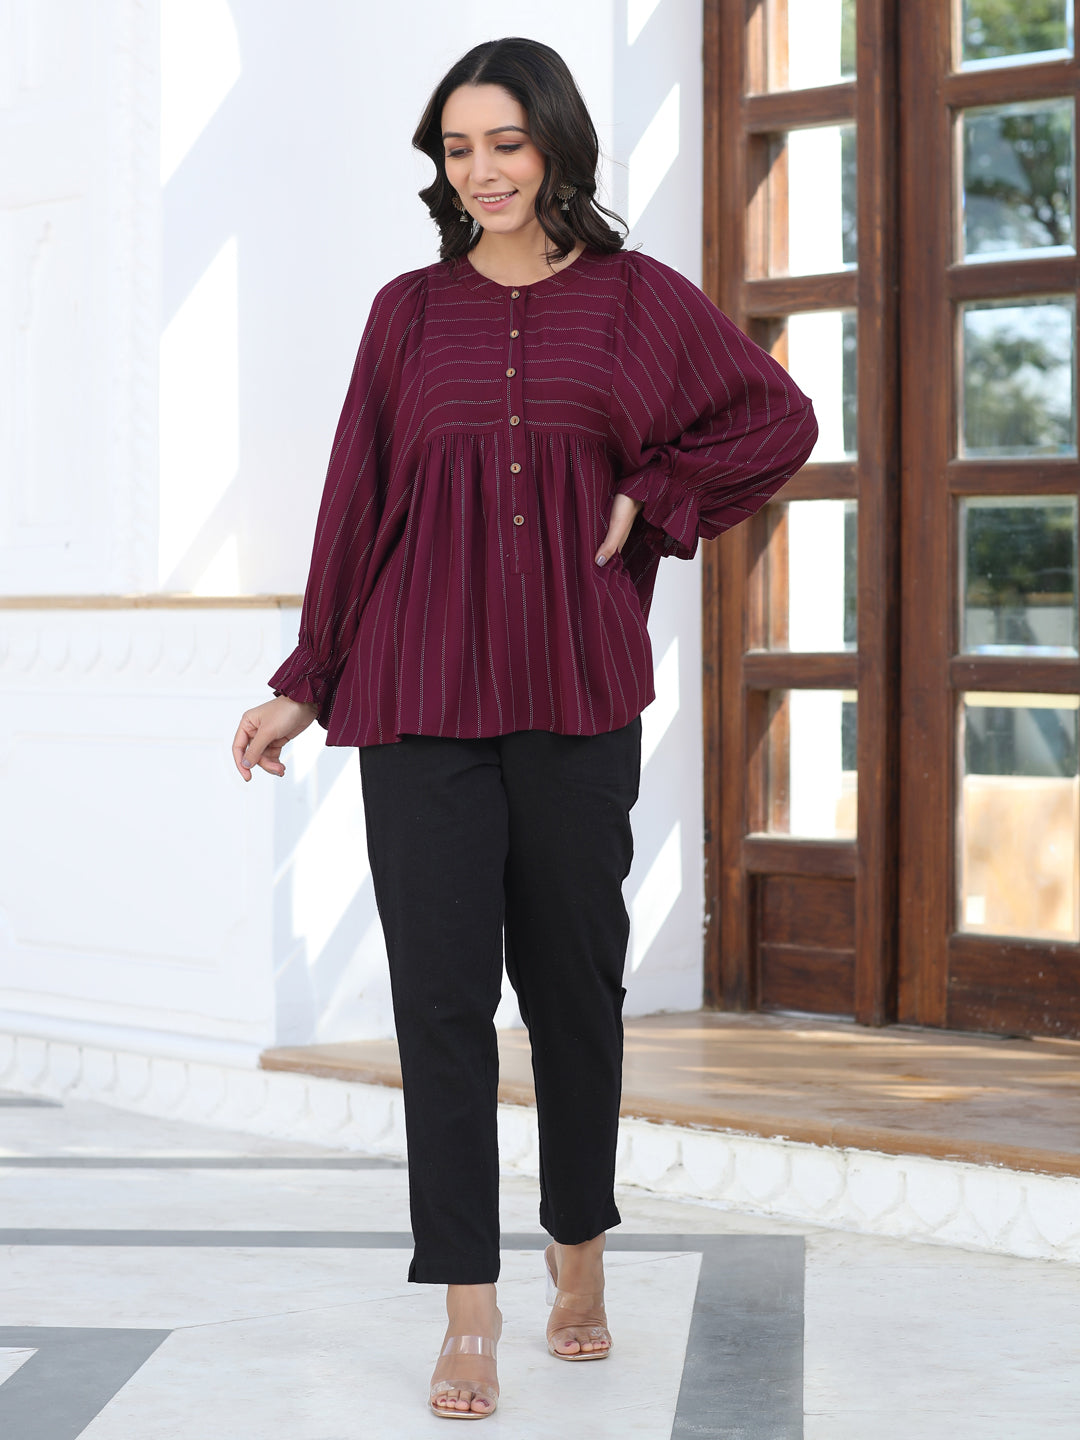 A Maroon Self Weave Rayon Lurex Gathered Top With Elasticated Gathered Sleeves